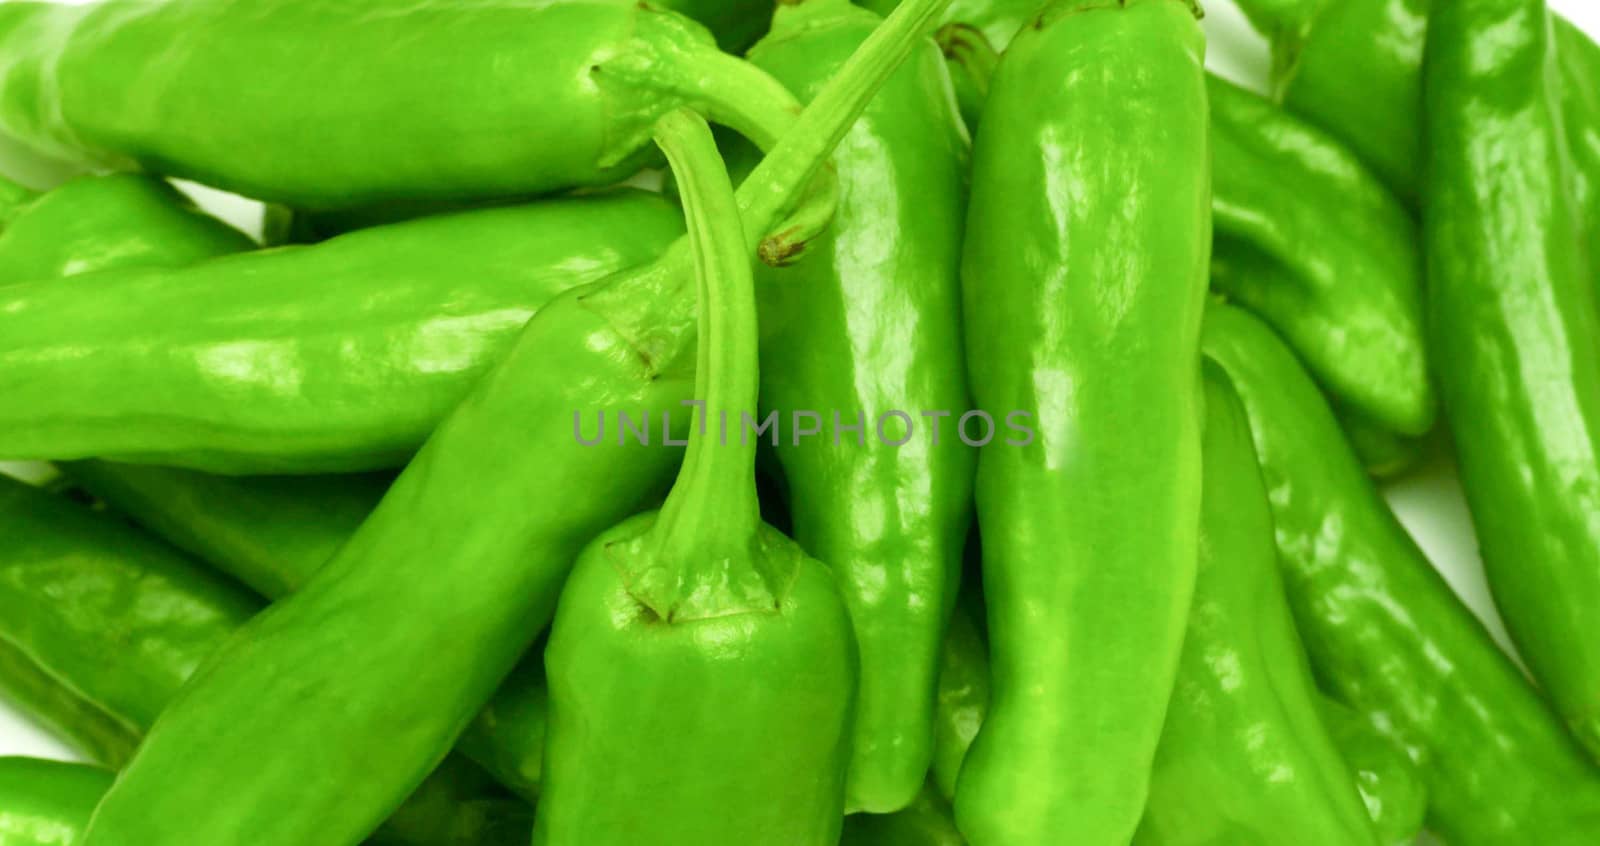 Lots of fresh green peppers